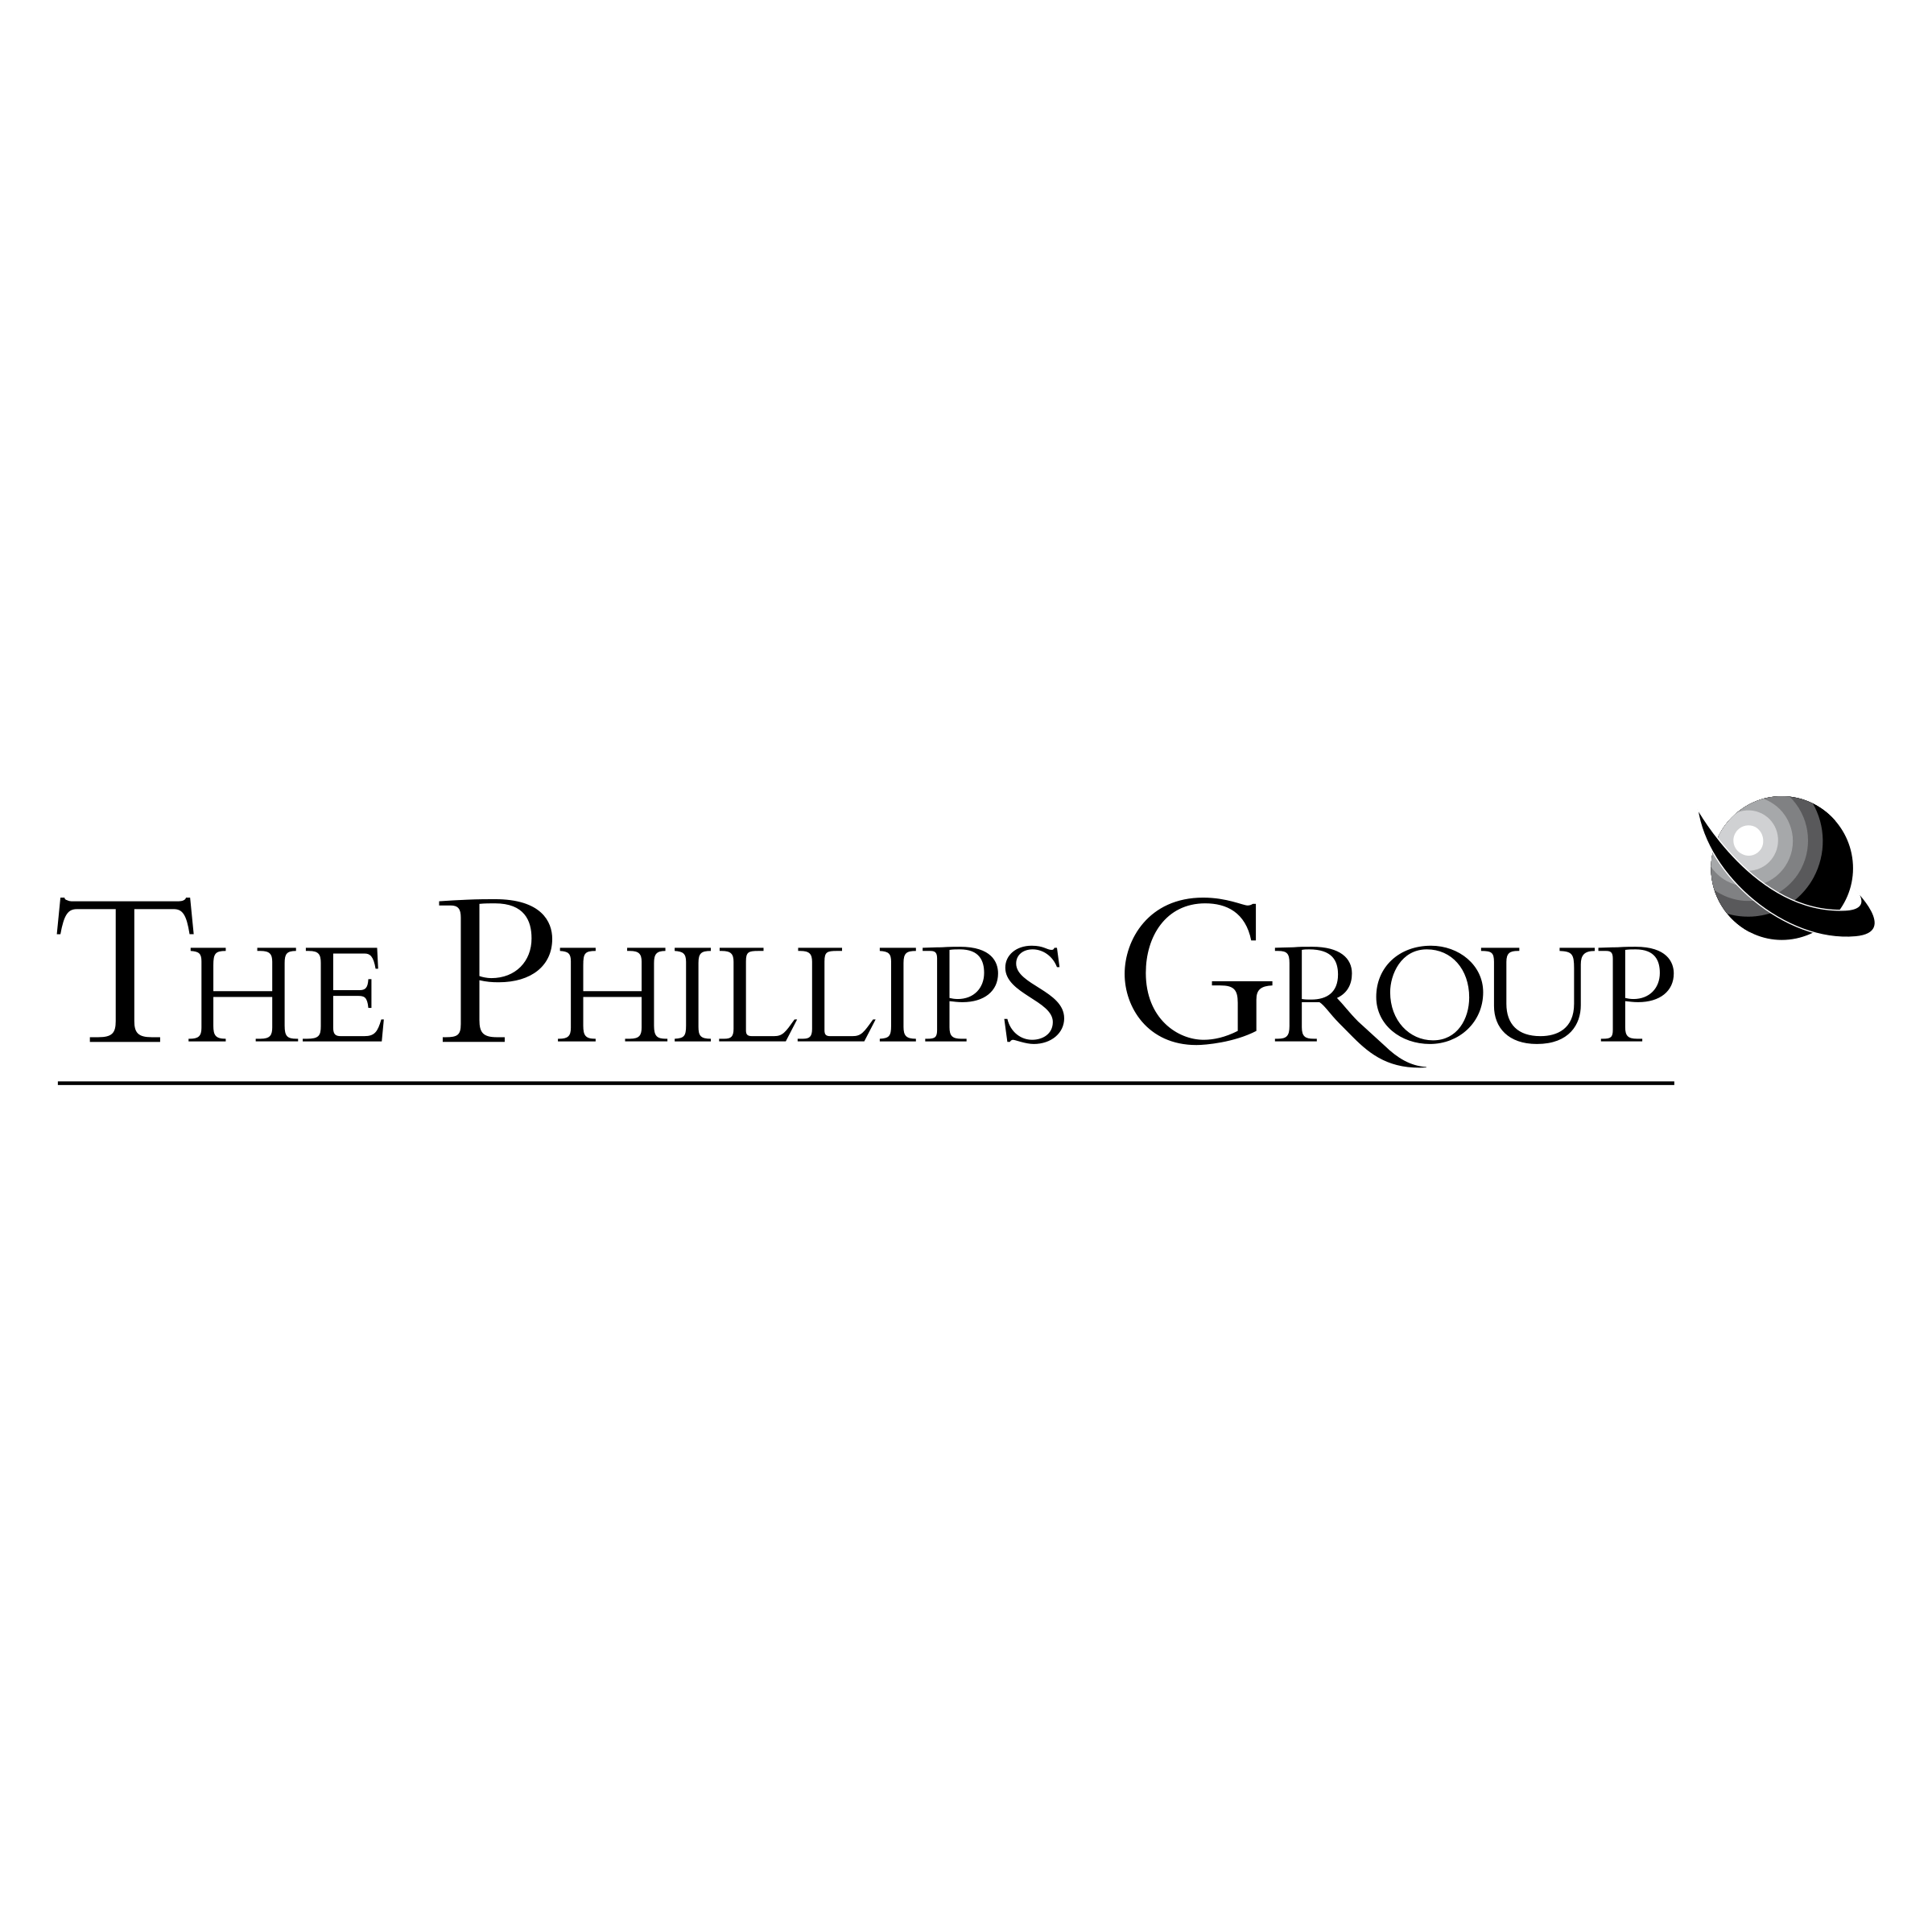 Phillips Supply Logo - The Phillips Group Logo PNG Transparent & SVG Vector